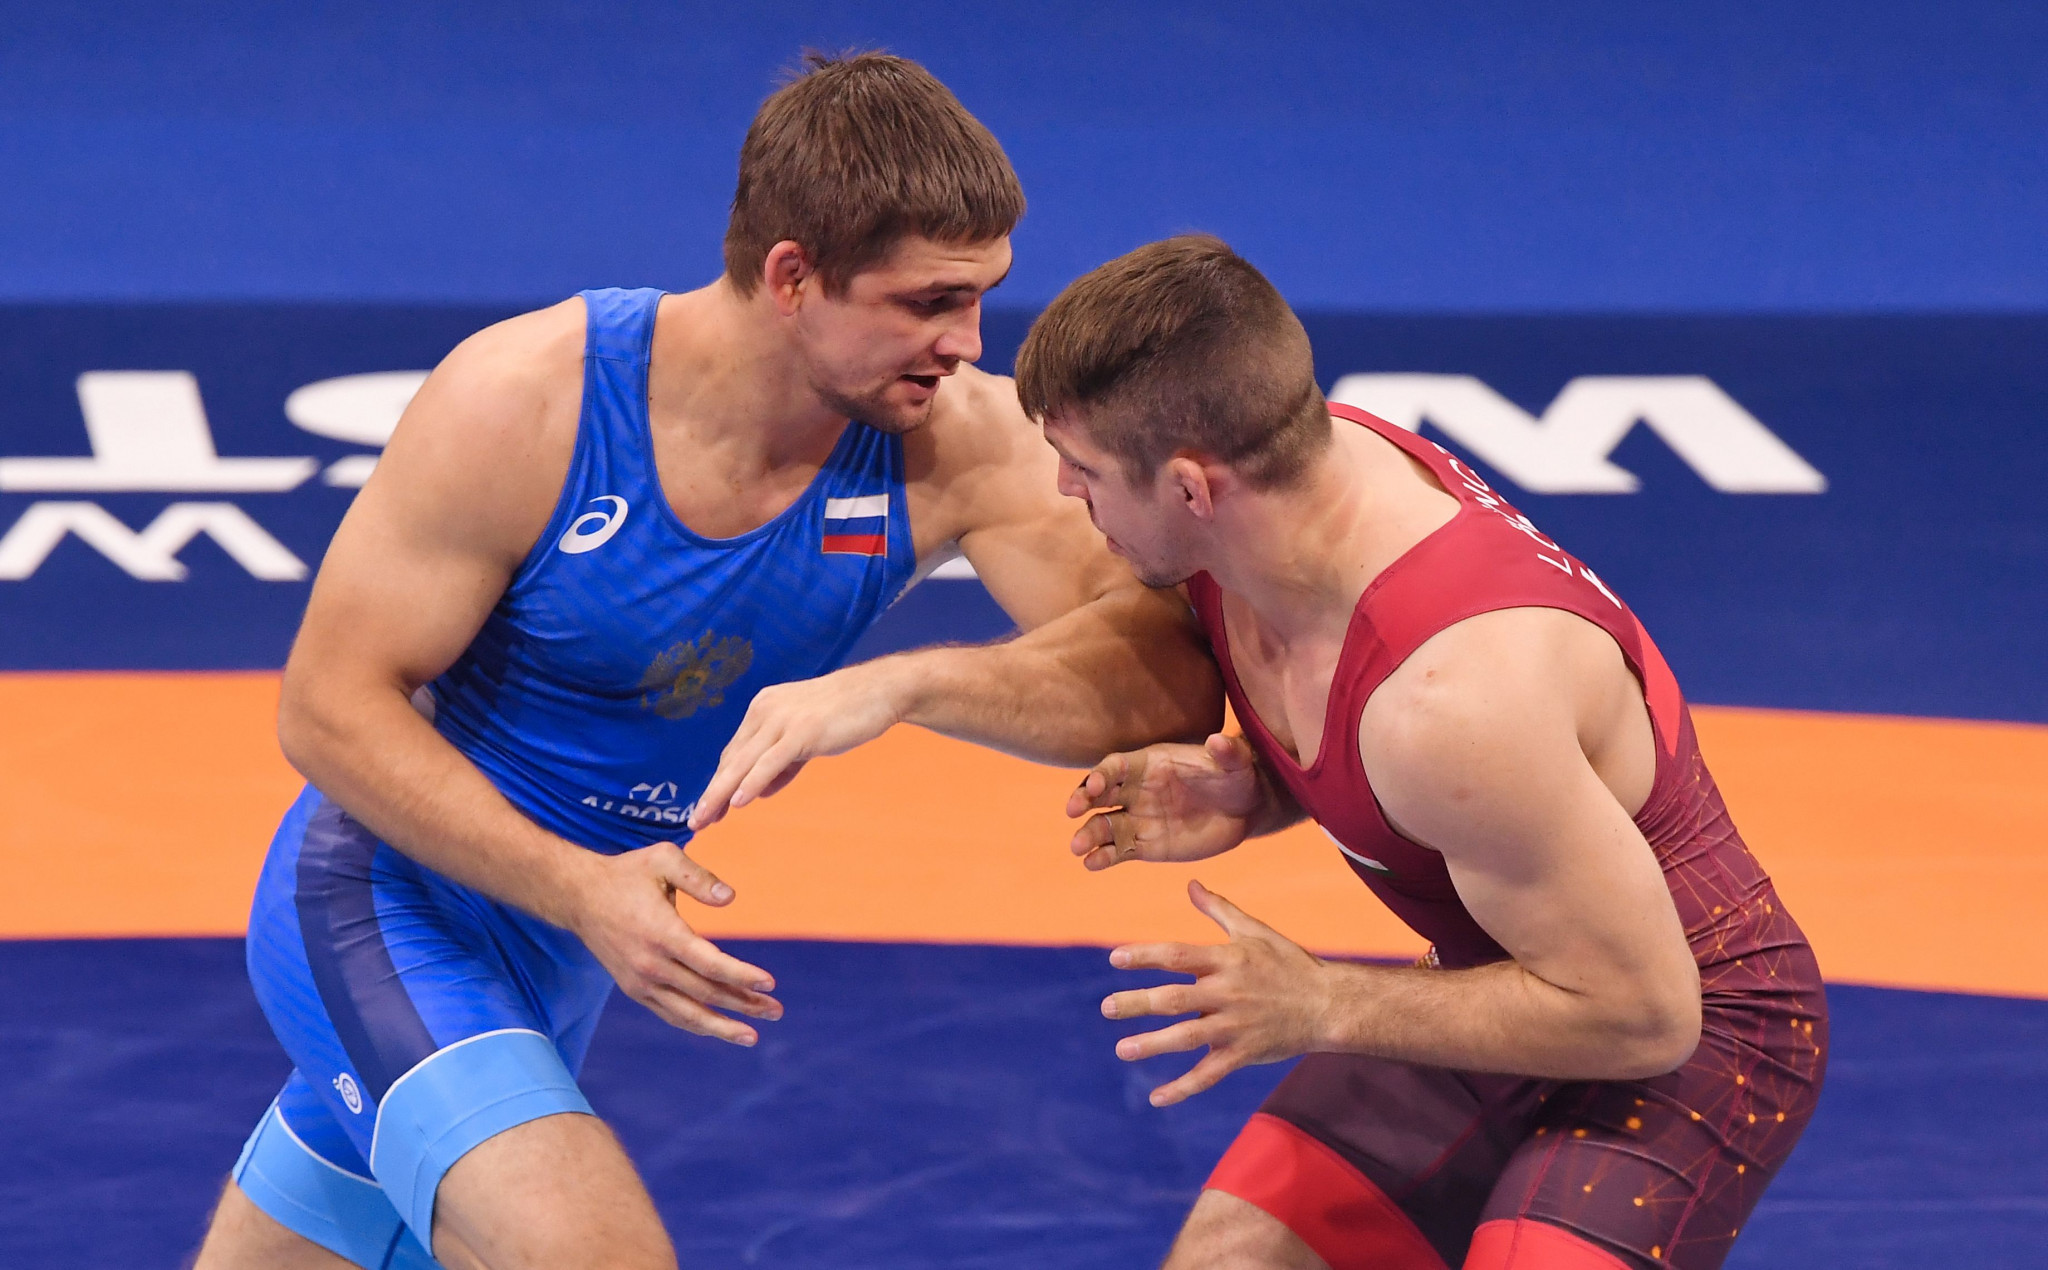 UWW announce suspension of all competitions until September 